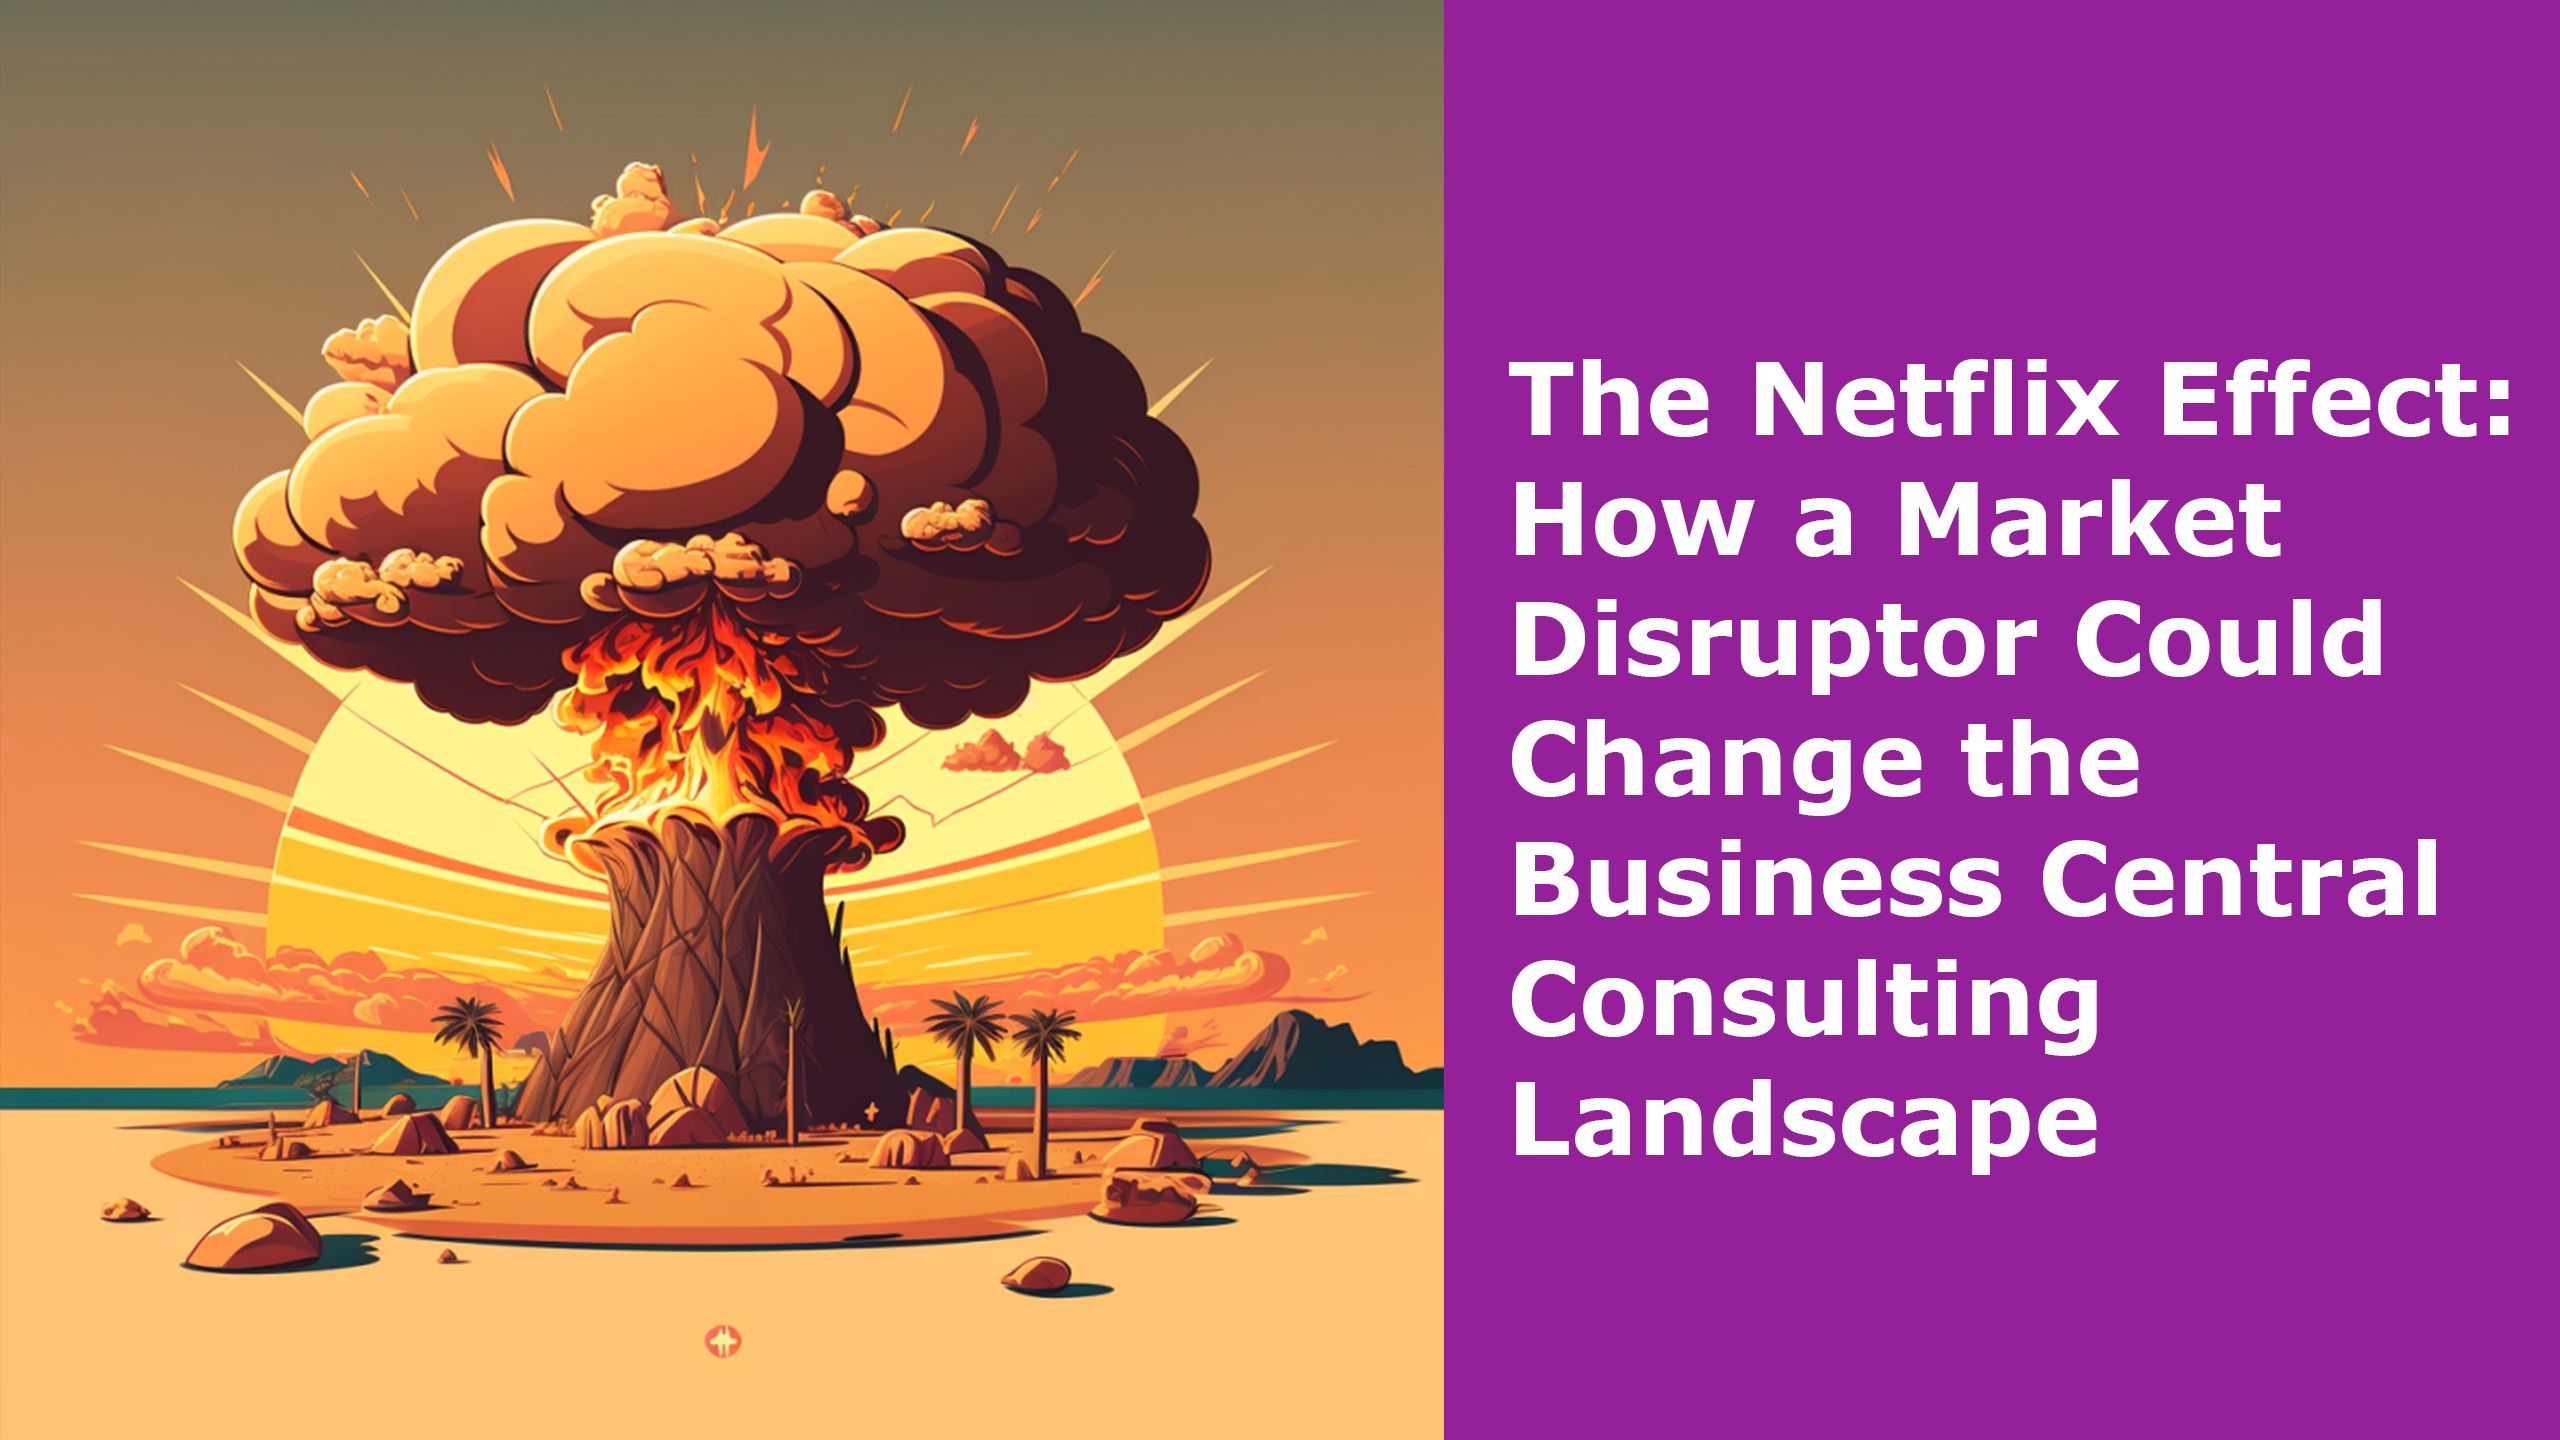 The Netflix Effect: How a Market Disruptor Could Change the Business Central Consulting Landscape